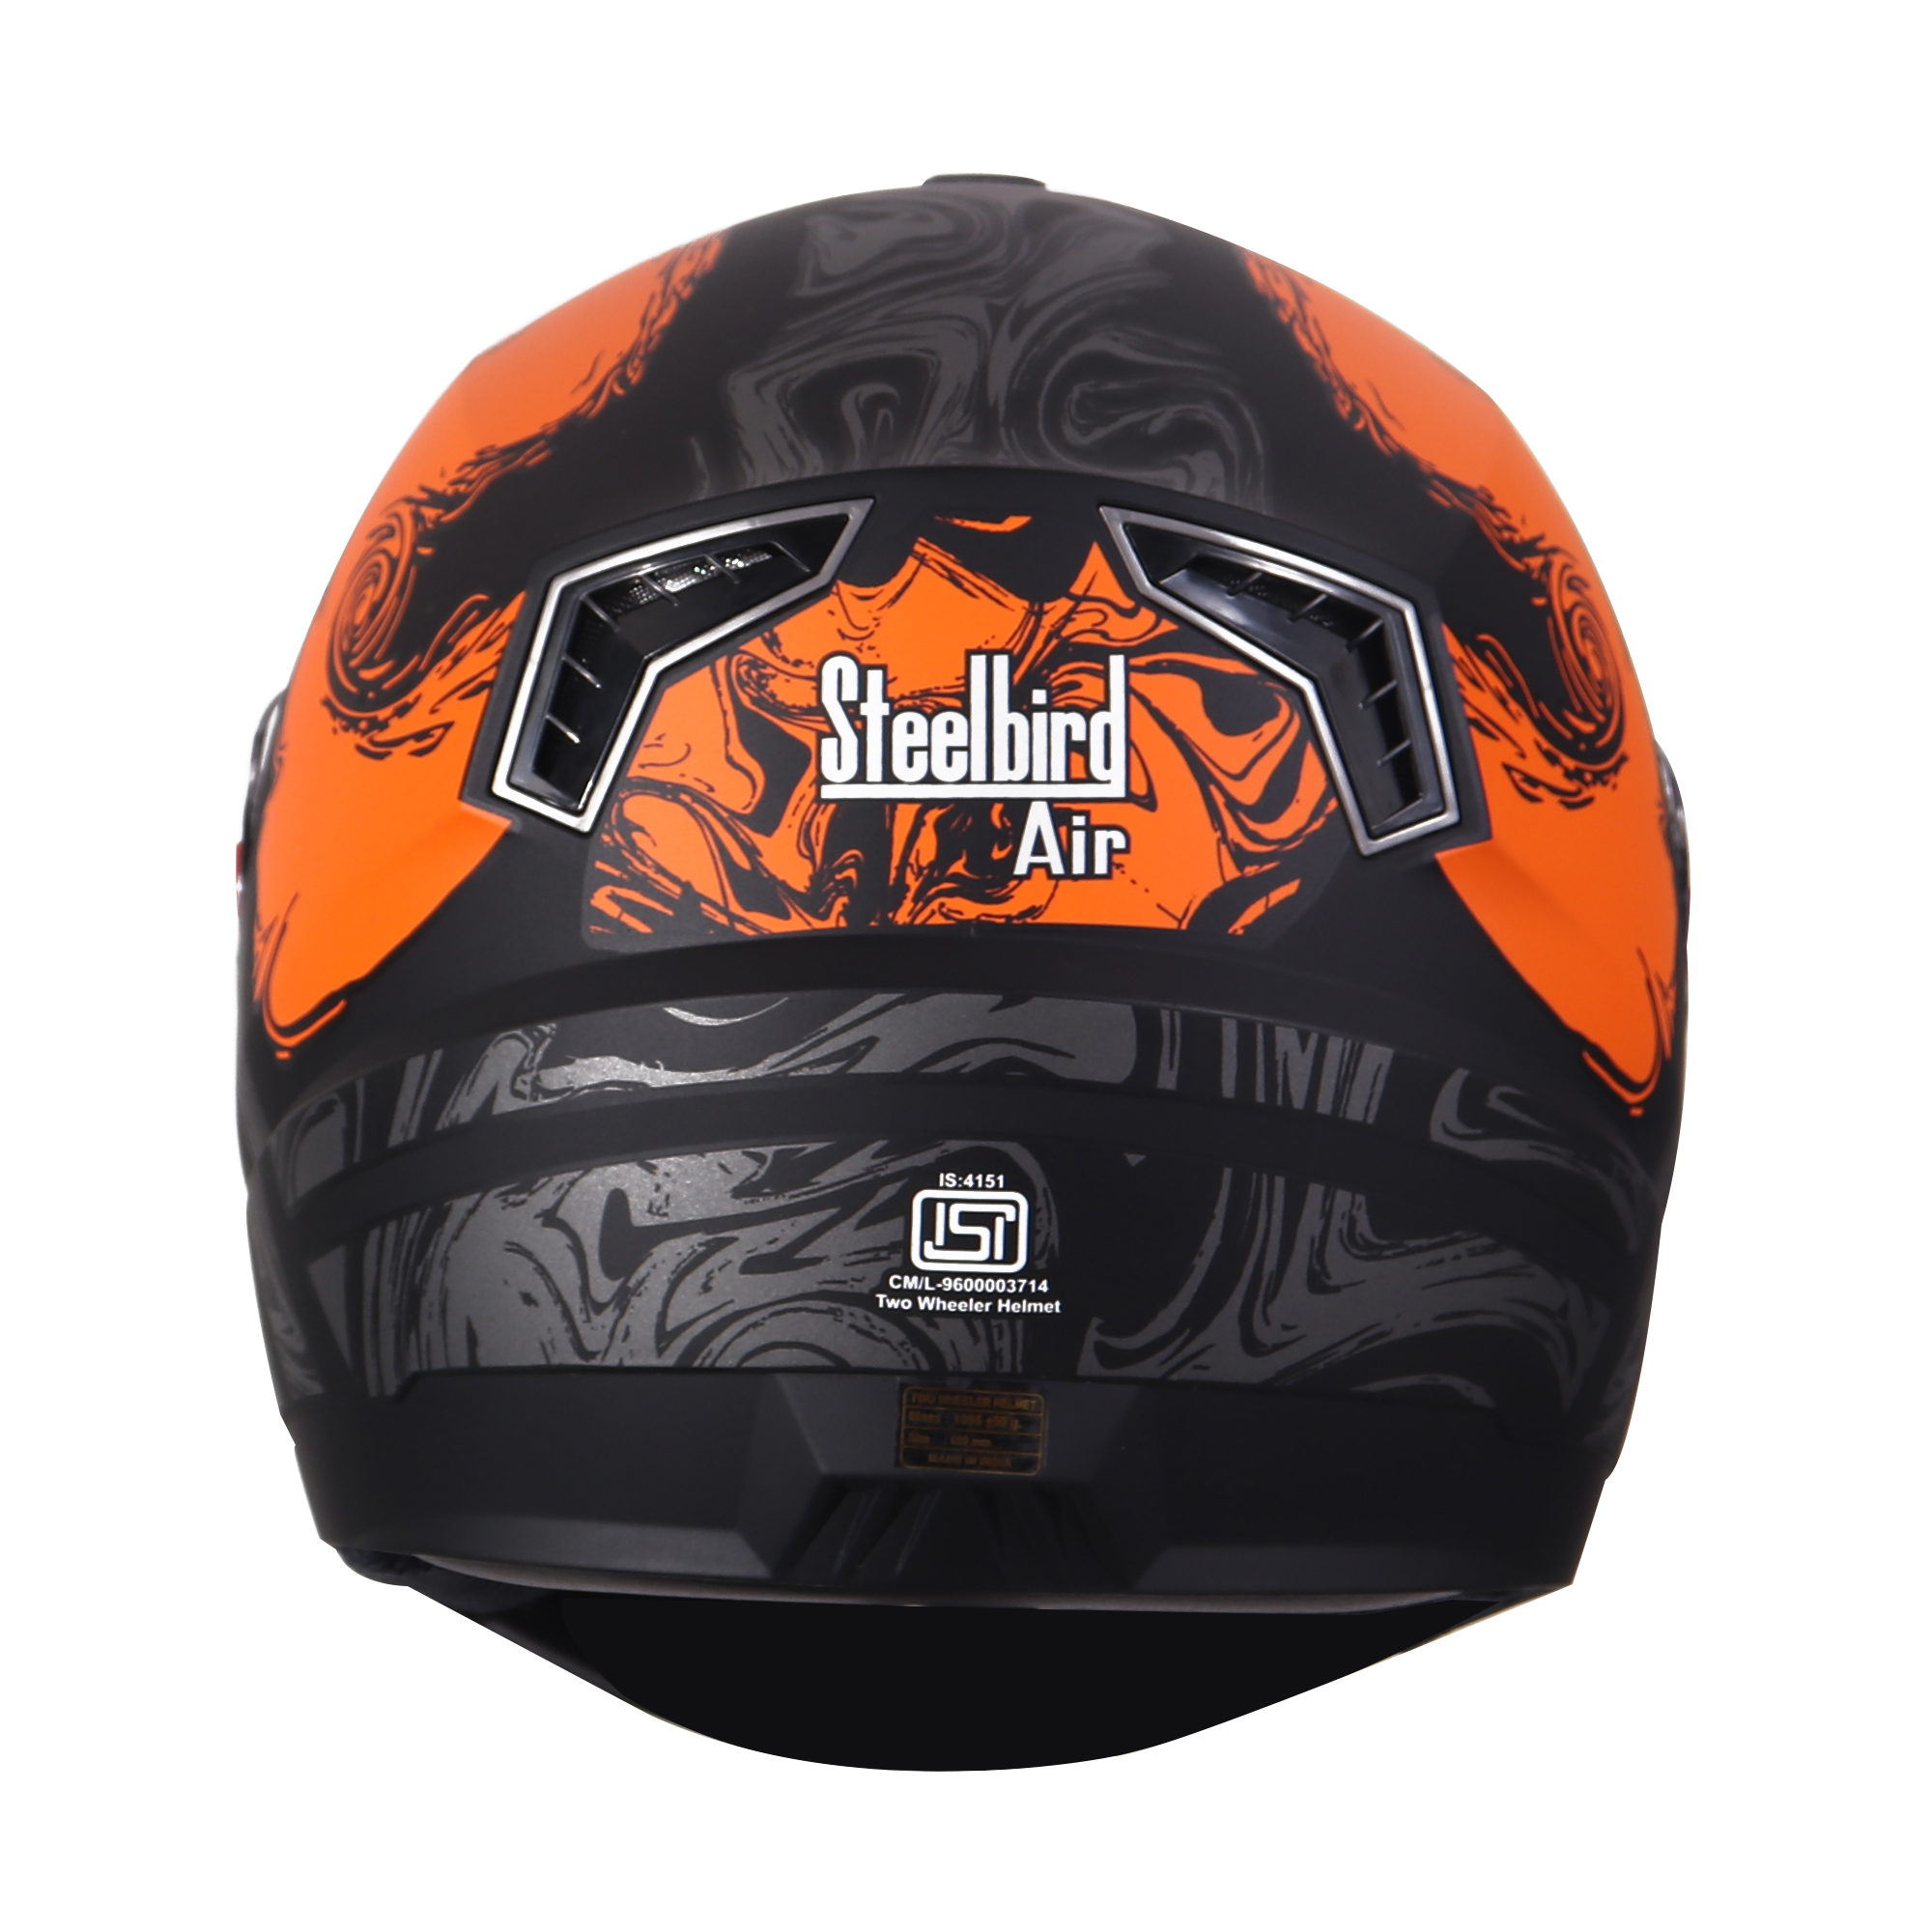 SBA-1 Craft Mat Black With Orange ( Fitted With Clear Visor  Extra Smoke Visor Free)